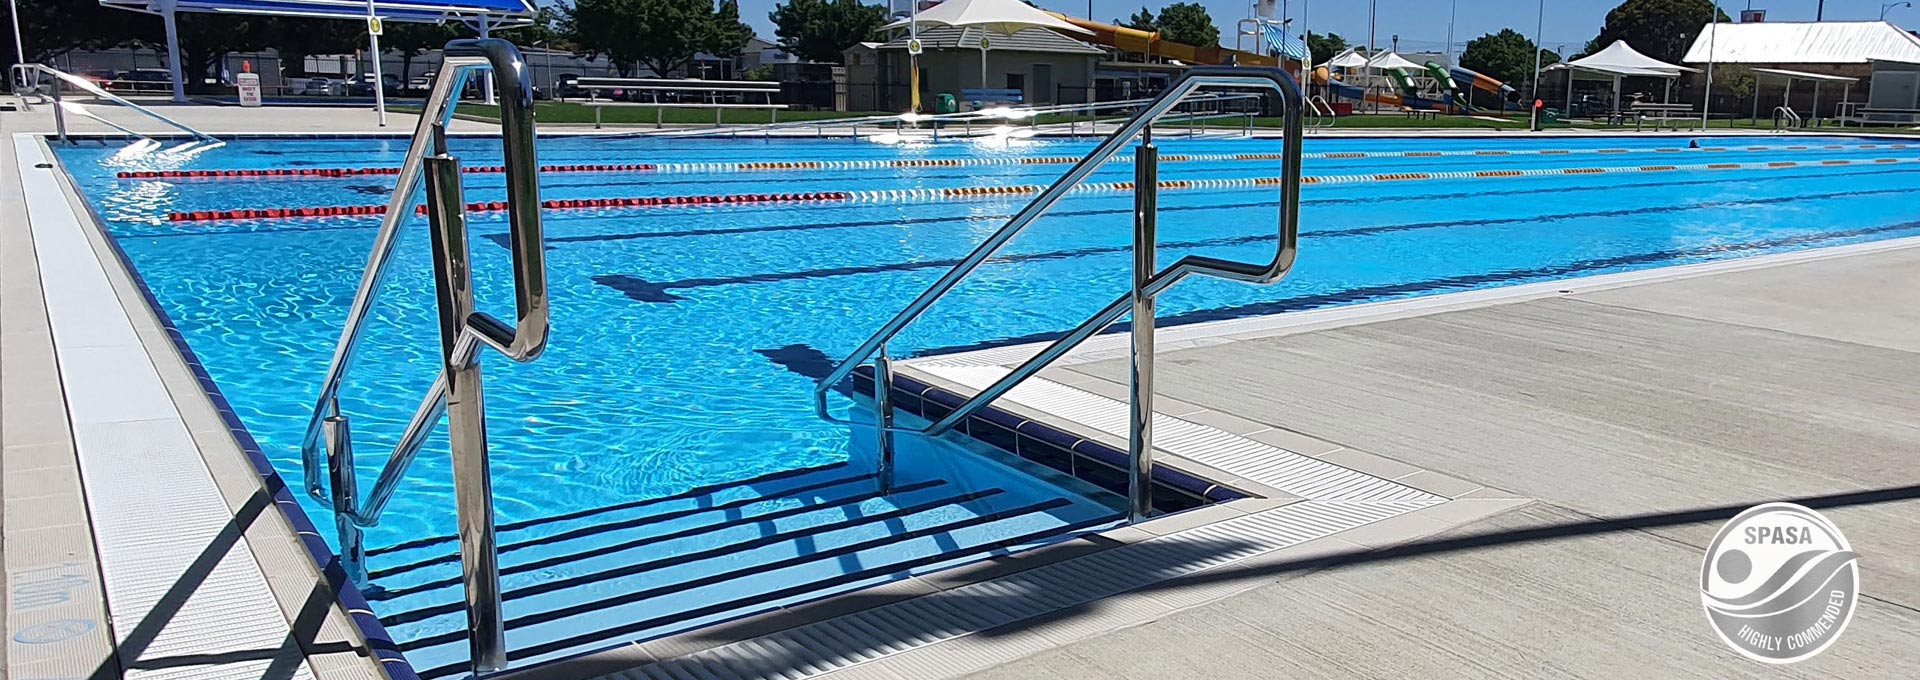 stage 1 pool renovation completed Natare wetdeck gutter